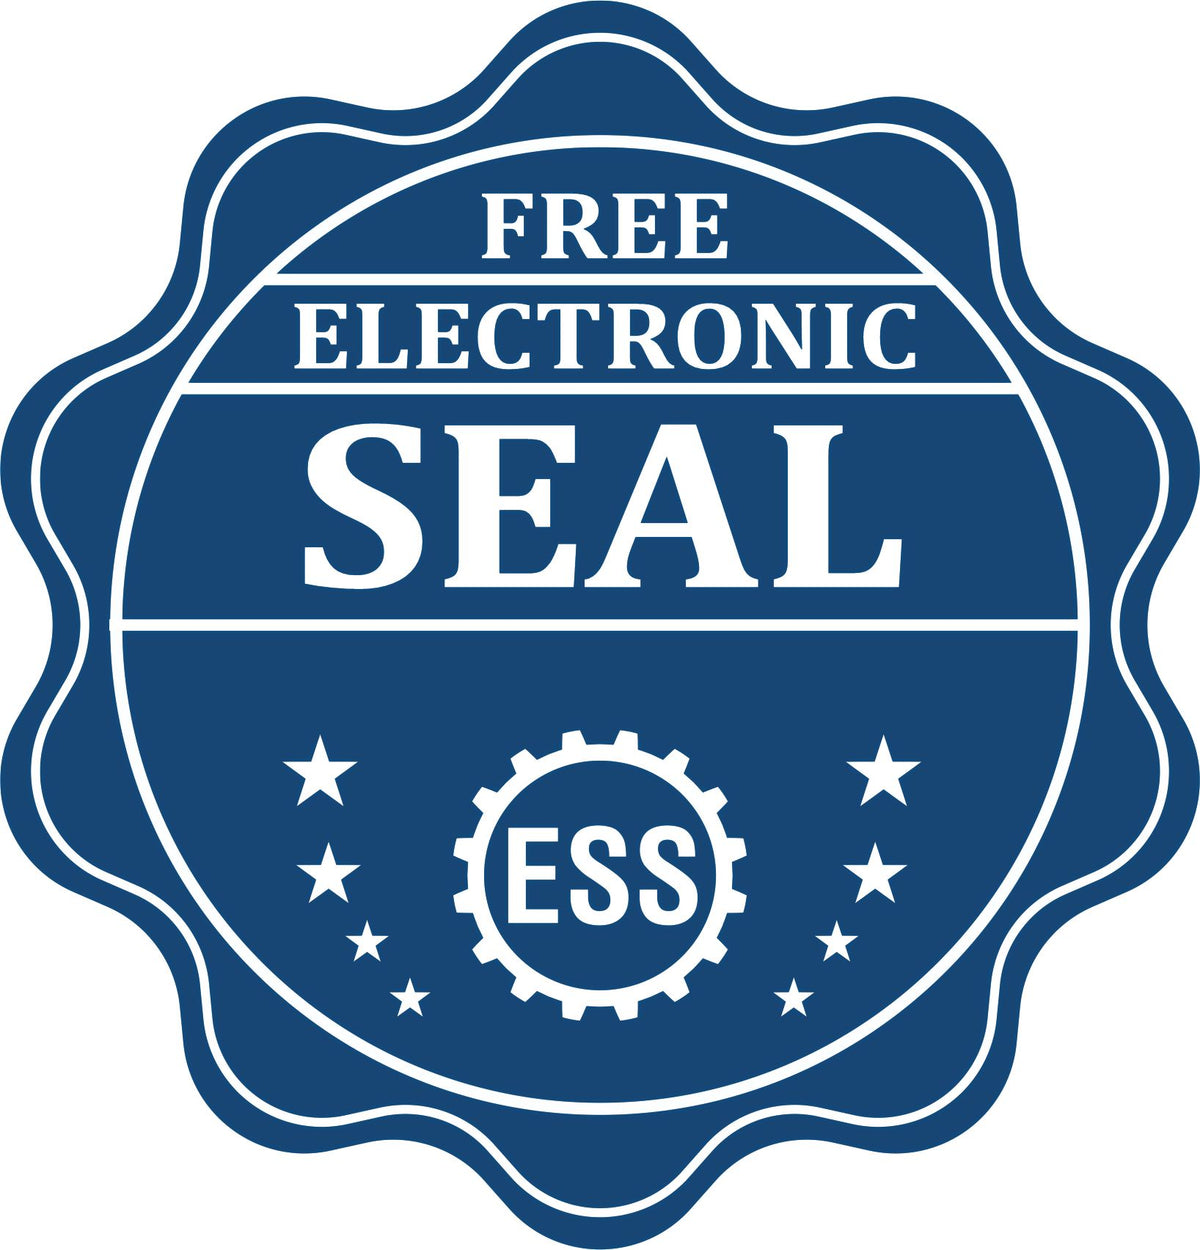 A badge showing a free electronic seal for the Heavy-Duty Minnesota Rectangular Notary Stamp with stars and the ESS gear on the emblem.